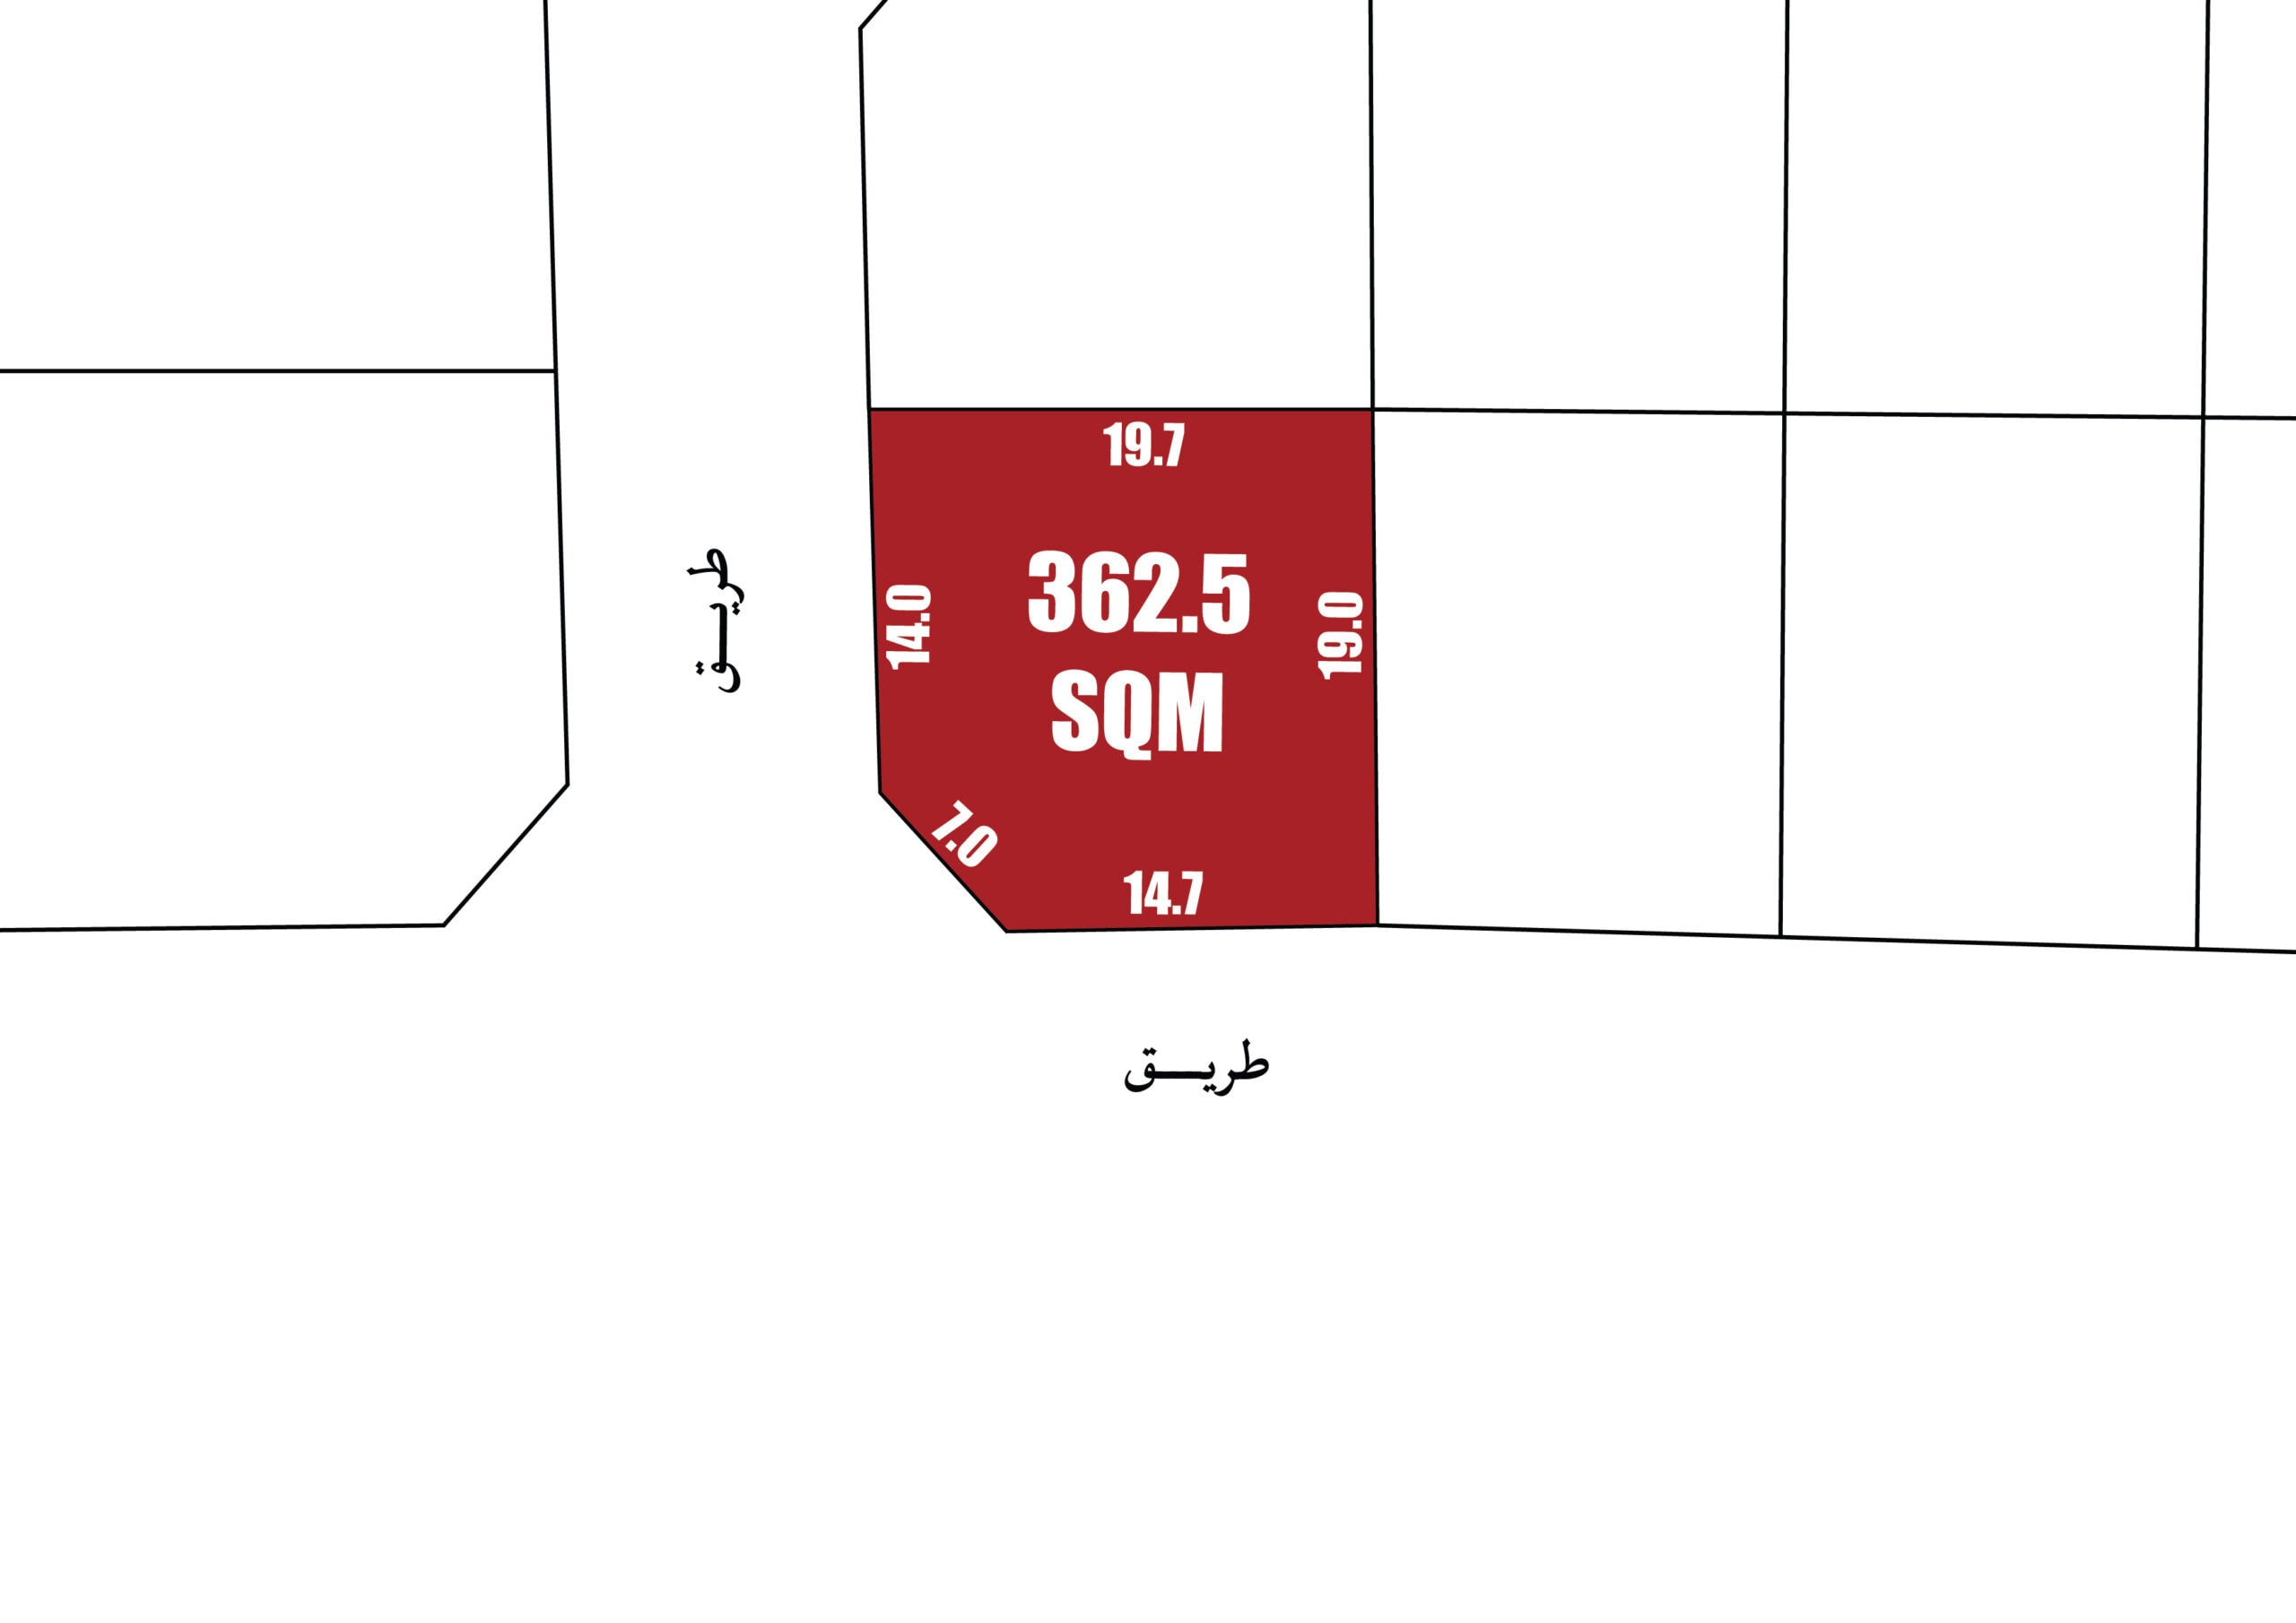 Architectural floor plan of a land for sale in Tubli, highlighting a 362.5 square meters area positioned on a 2 roads corner, with measurements and numerical details in Arabic and English